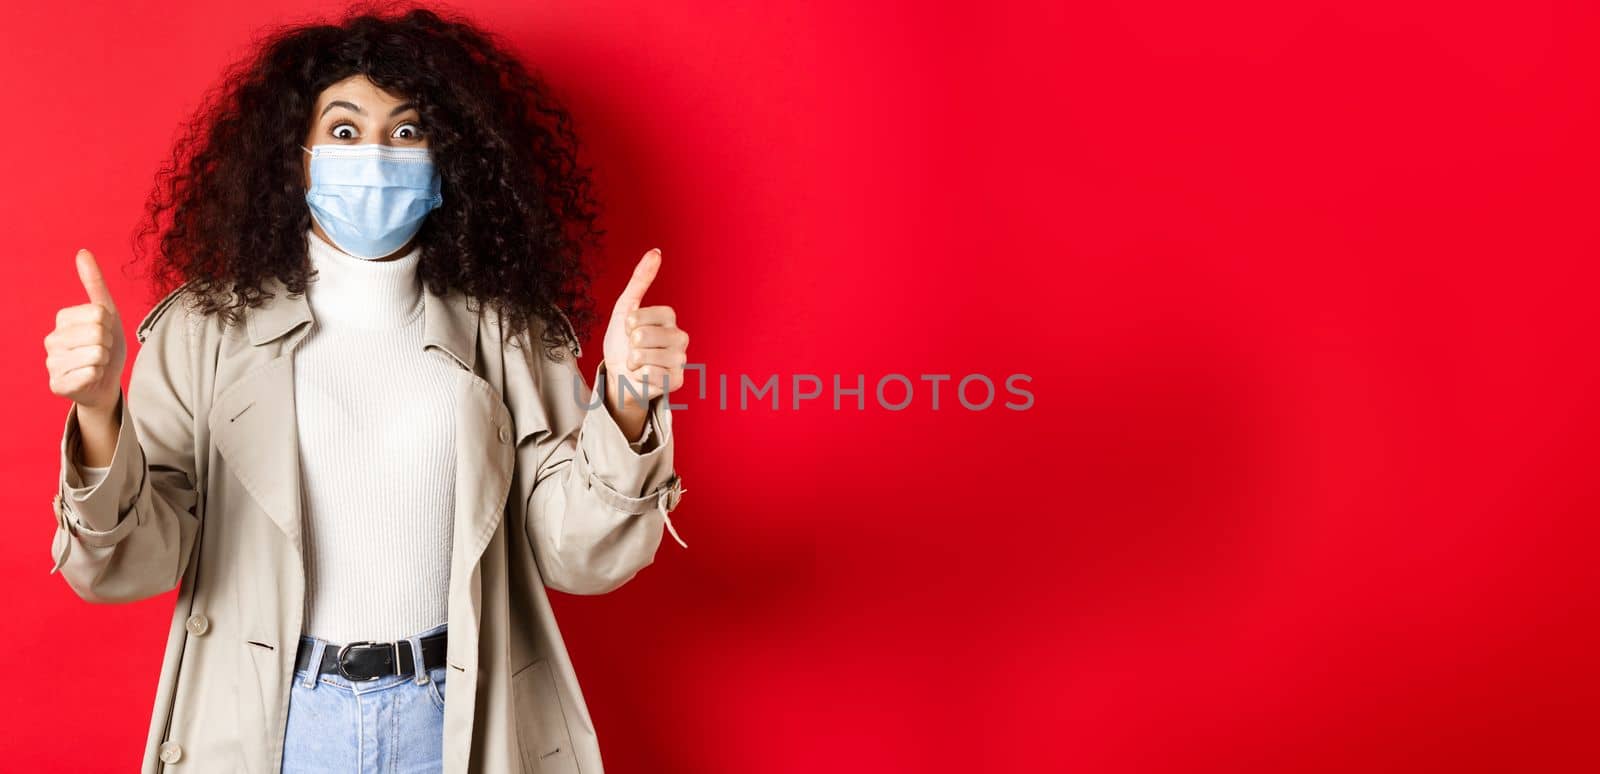 Covid-19, pandemic and quarantine concept. Excited girl with curly hair, wearing trench coat and medical mask, showing thumbs up in approval, red background.